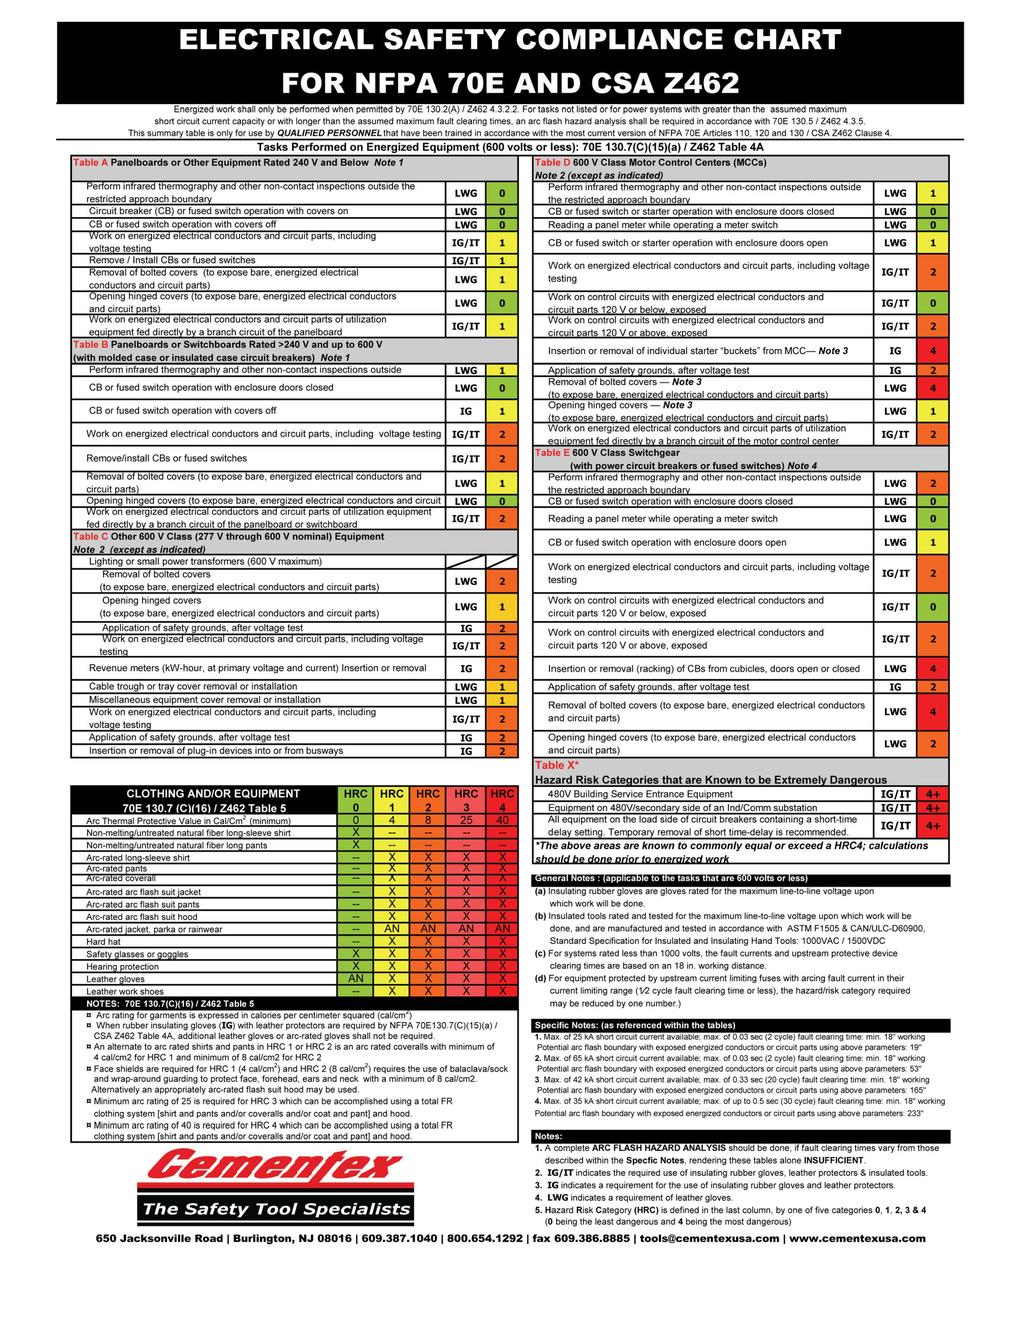 ELECTRICAL SAFETY COMPLIANCE CHART FOR NFPA 7E AND CSA Z462 